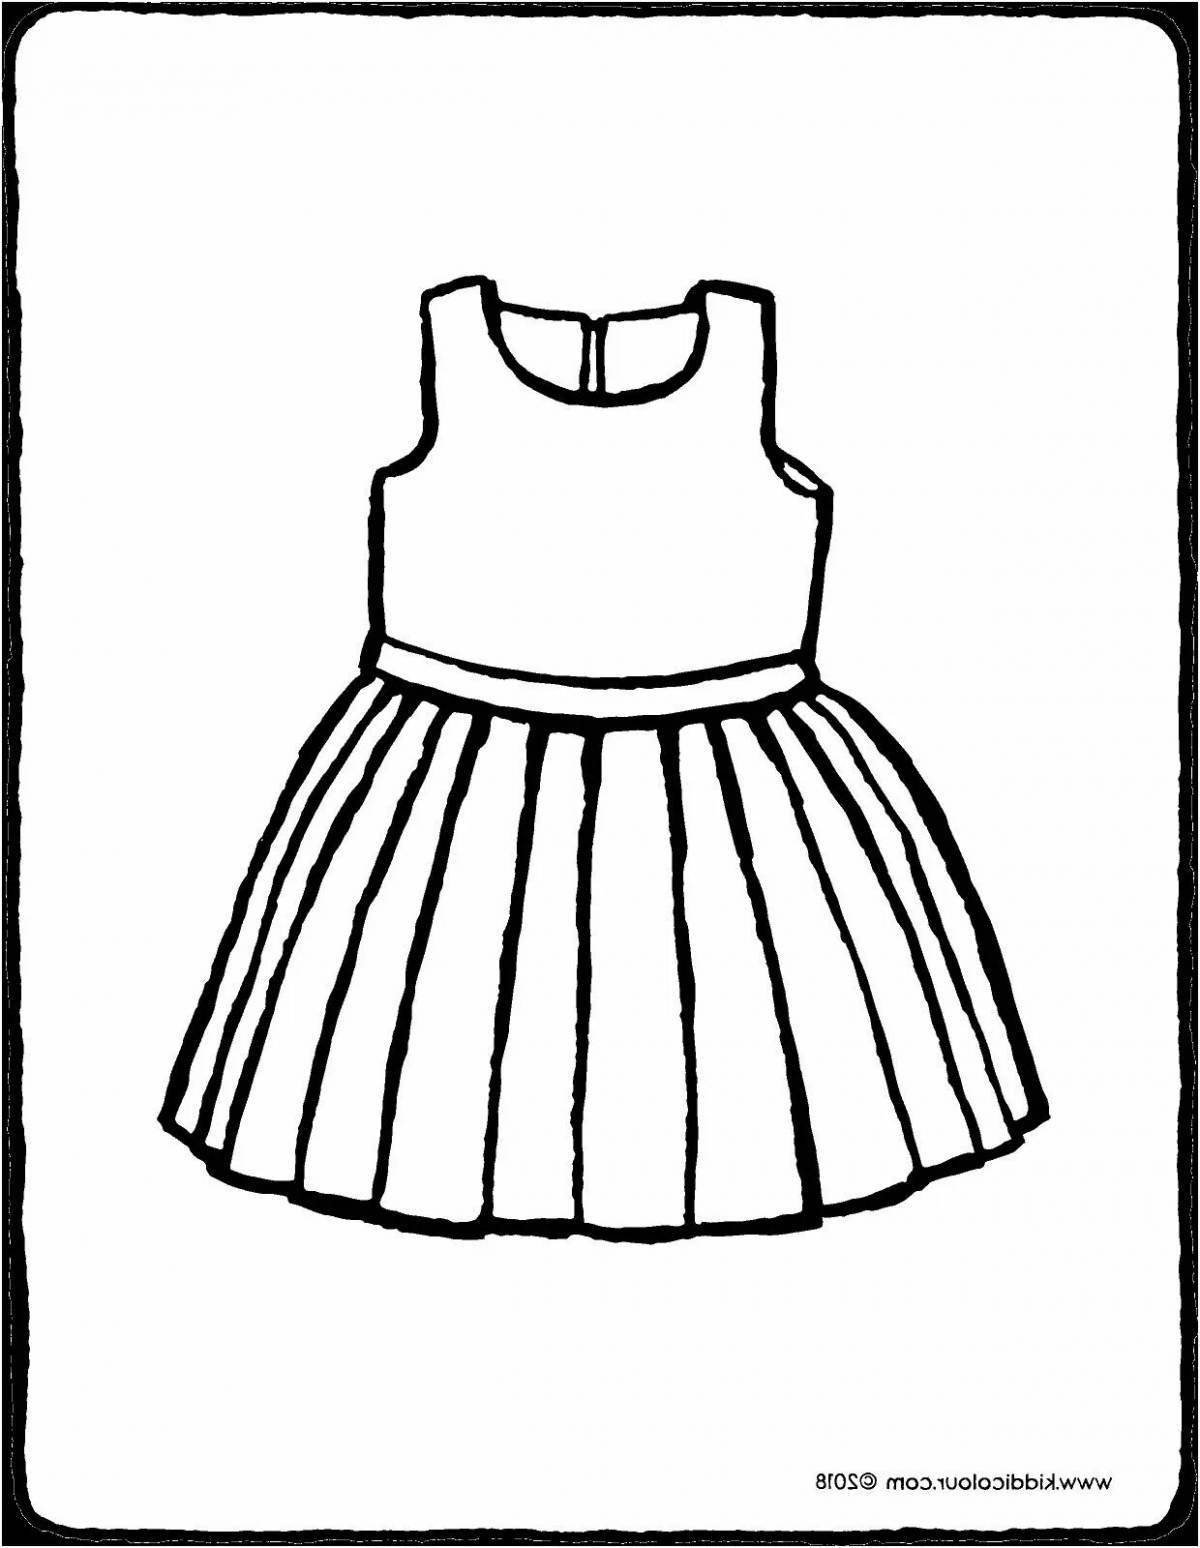 Coloring dress for children 4-5 years old